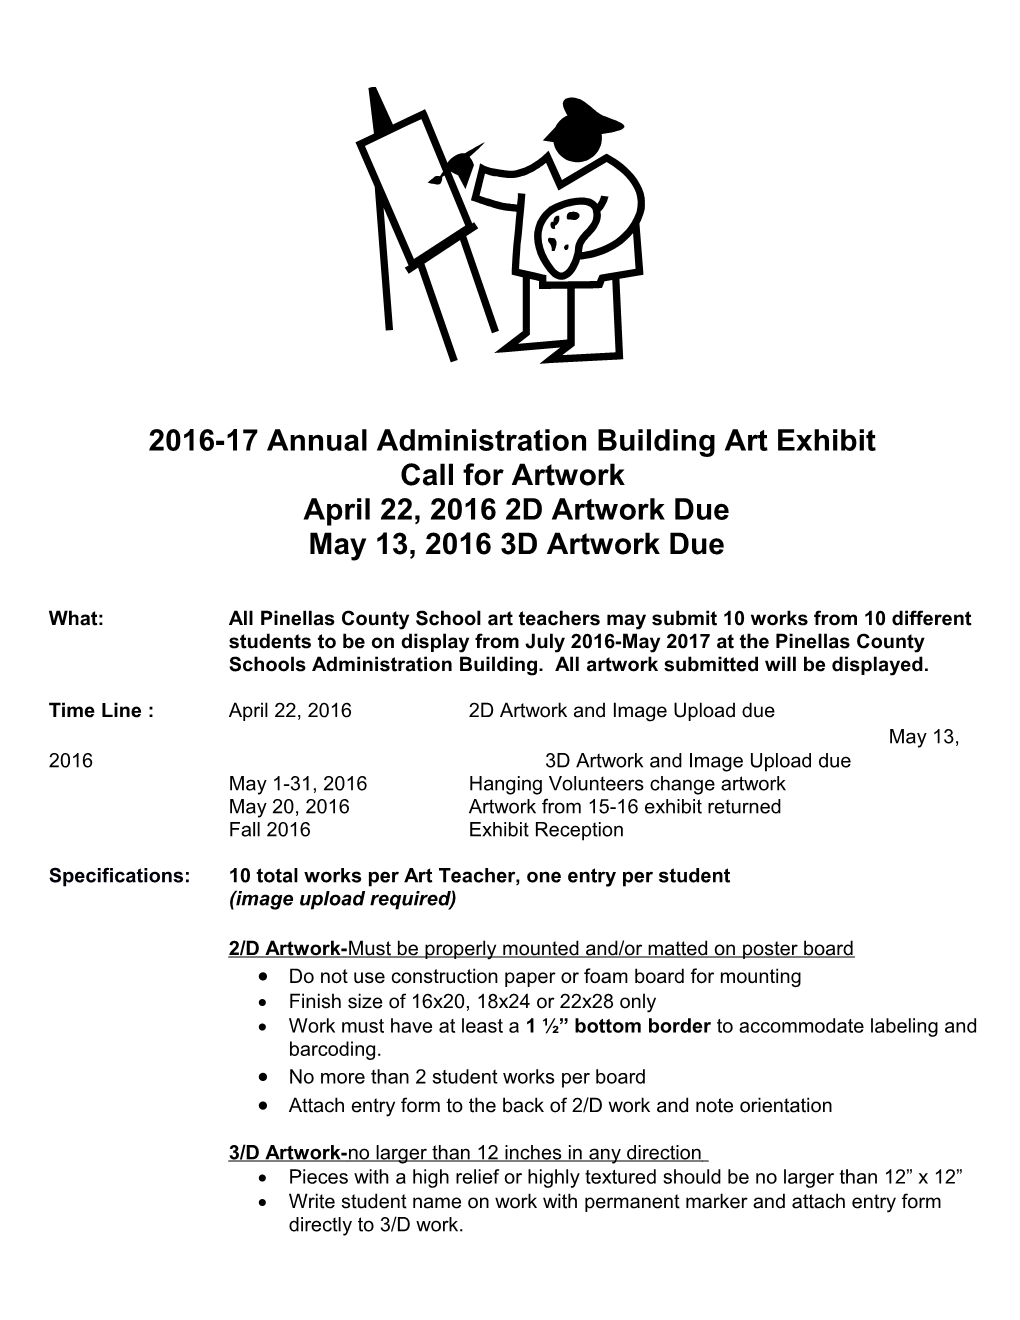 Annual Administration Building Art Exhibit Call for Artwork